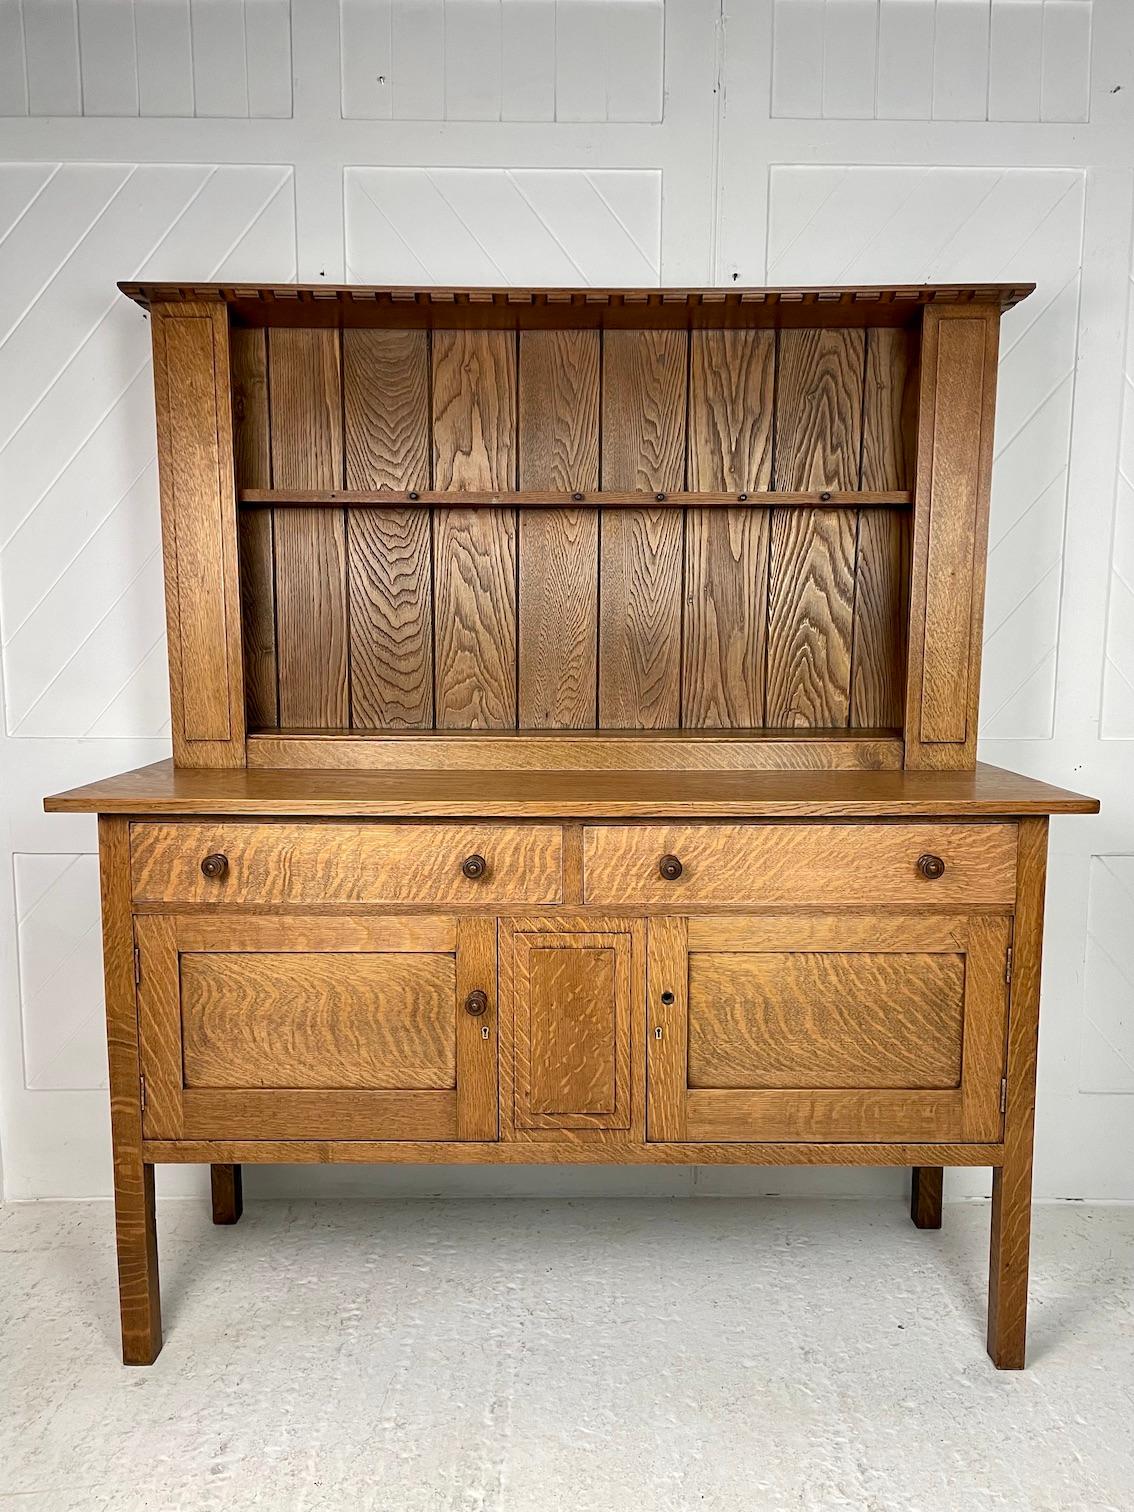 Arts & crafts quarter sawn oak dresser
with turned knob handles
Chestnut tongue and groove back boards
‘Letchworth’ range
Heals
Circa 1905
Designed by Sir Amrbose Heal and displayed at Letchworth as part of the Cottage Furniture Range, first